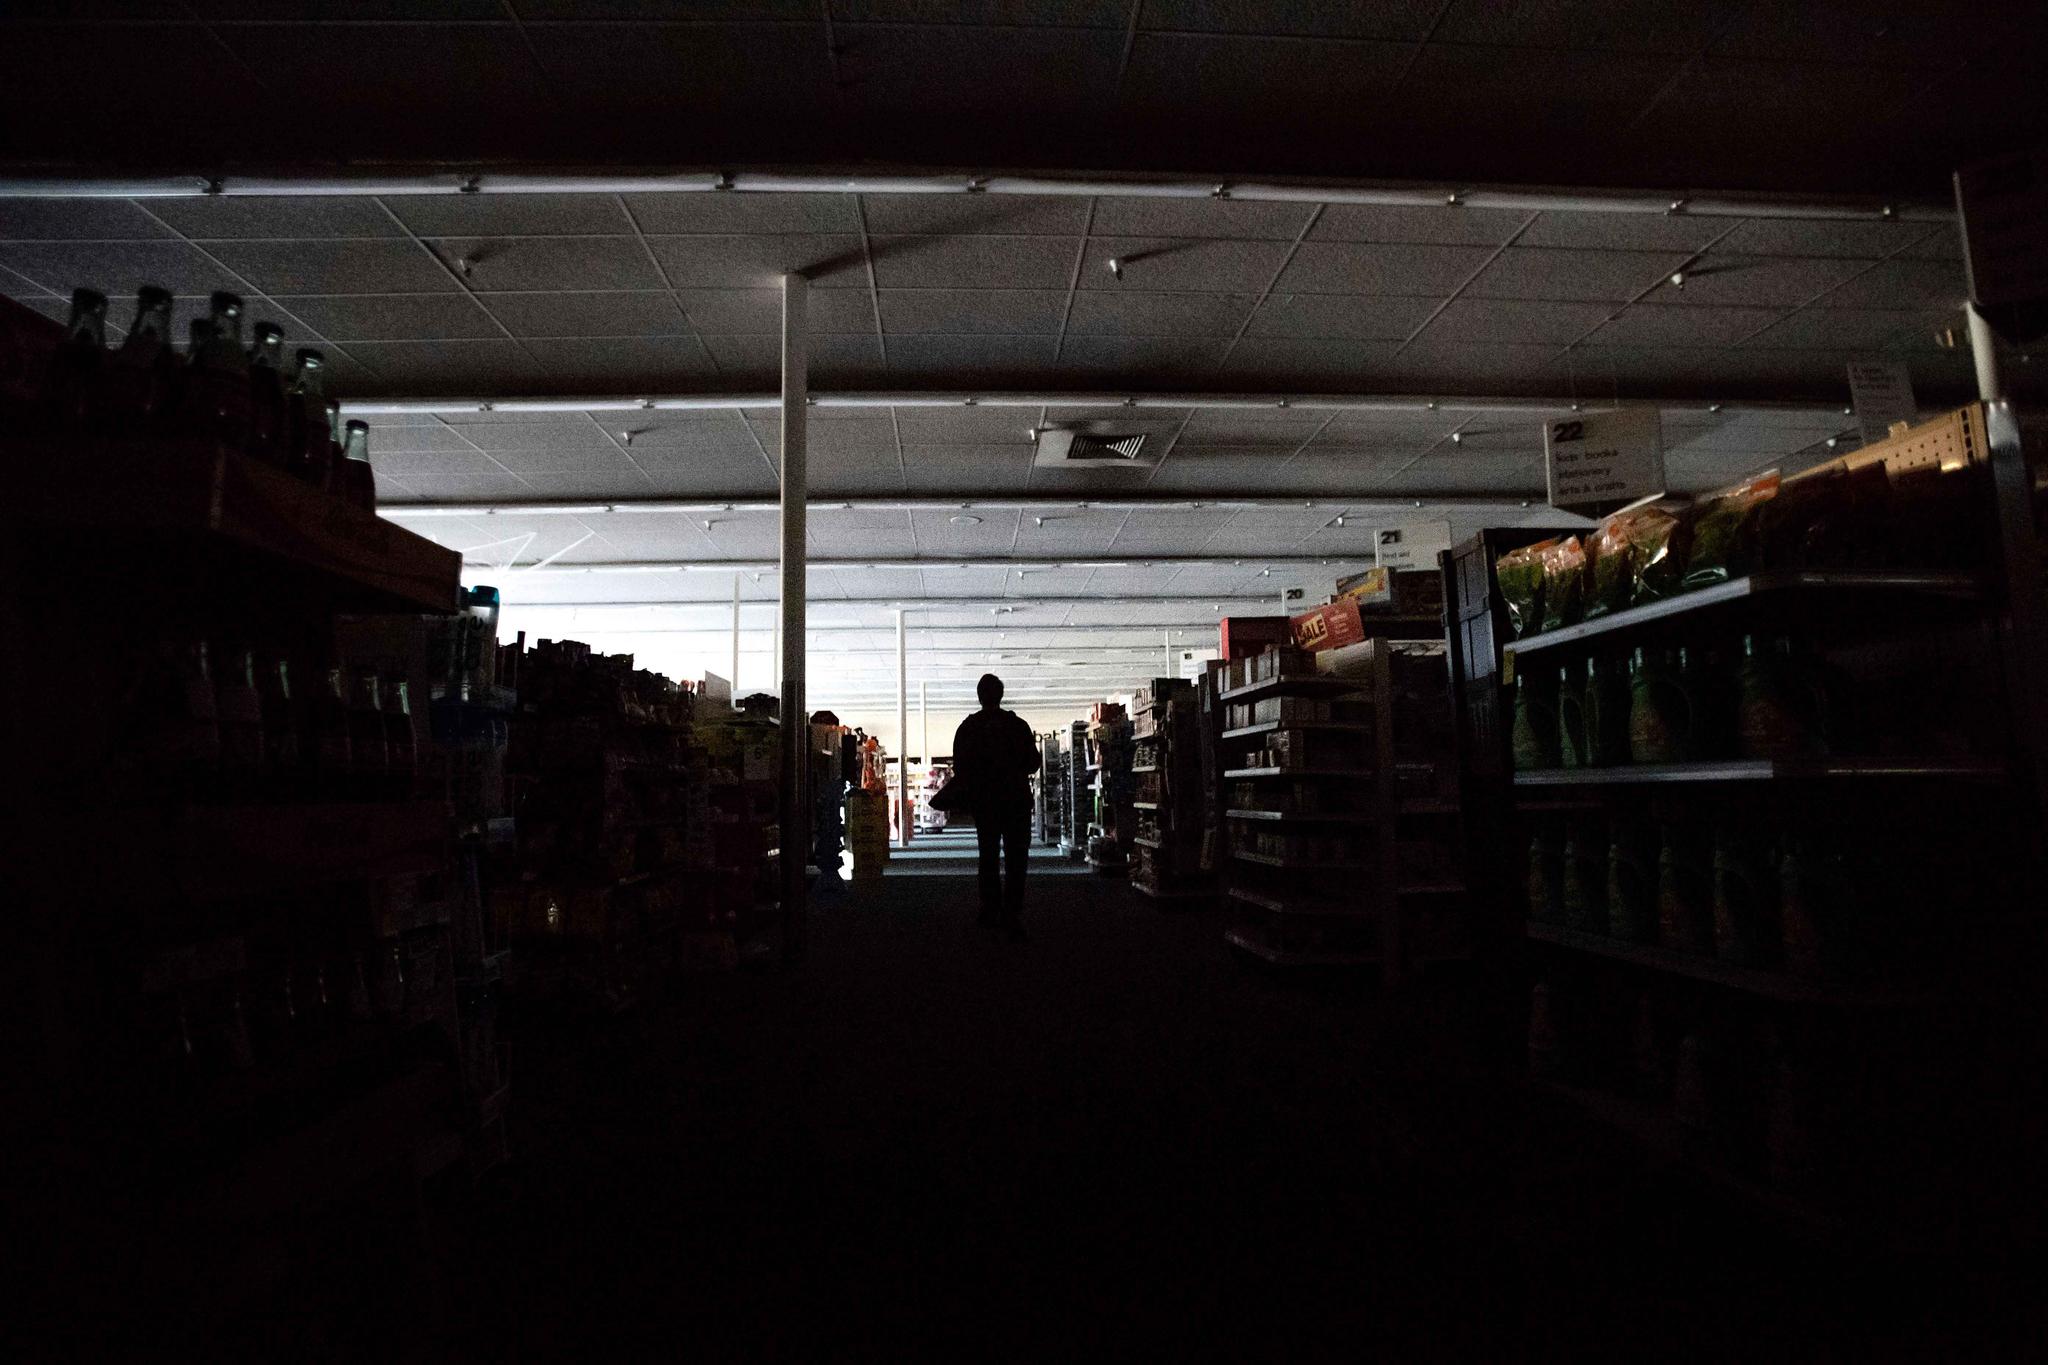 Power outage at CVS Pharmacy in California